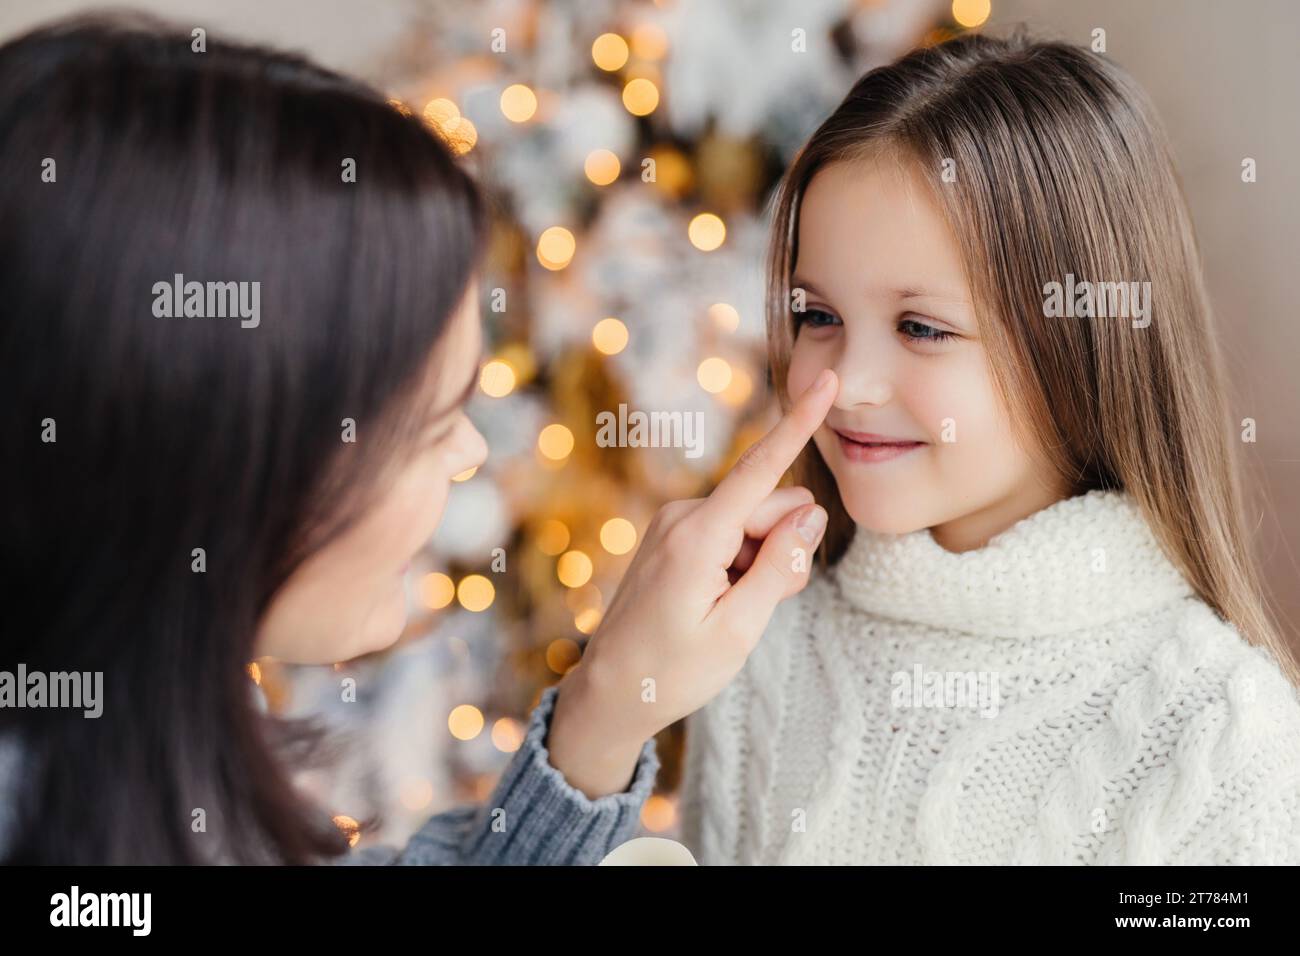 A tender moment as a mother affectionately touches her child's nose, with a softly lit Christmas tree behind Stock Photo